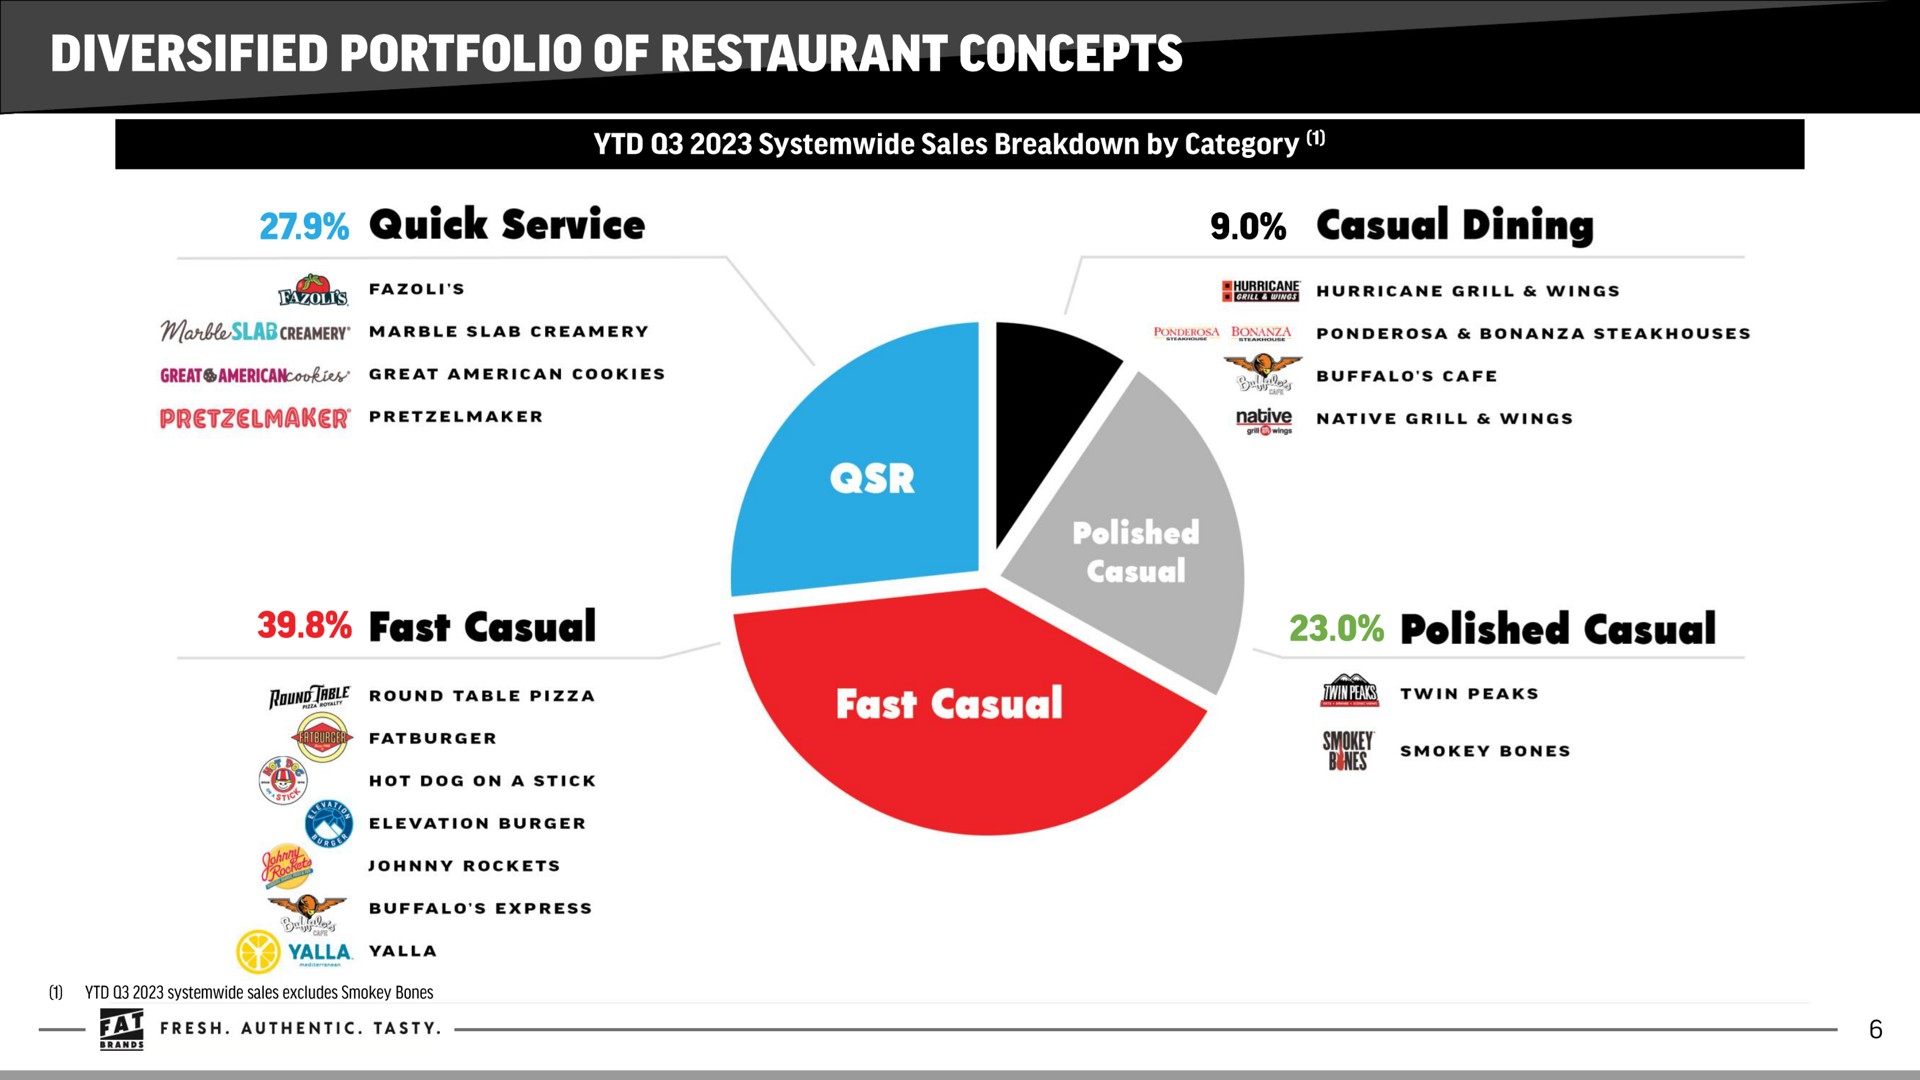 a a a quick service casual dining fast casual polished casual | FAT Brands